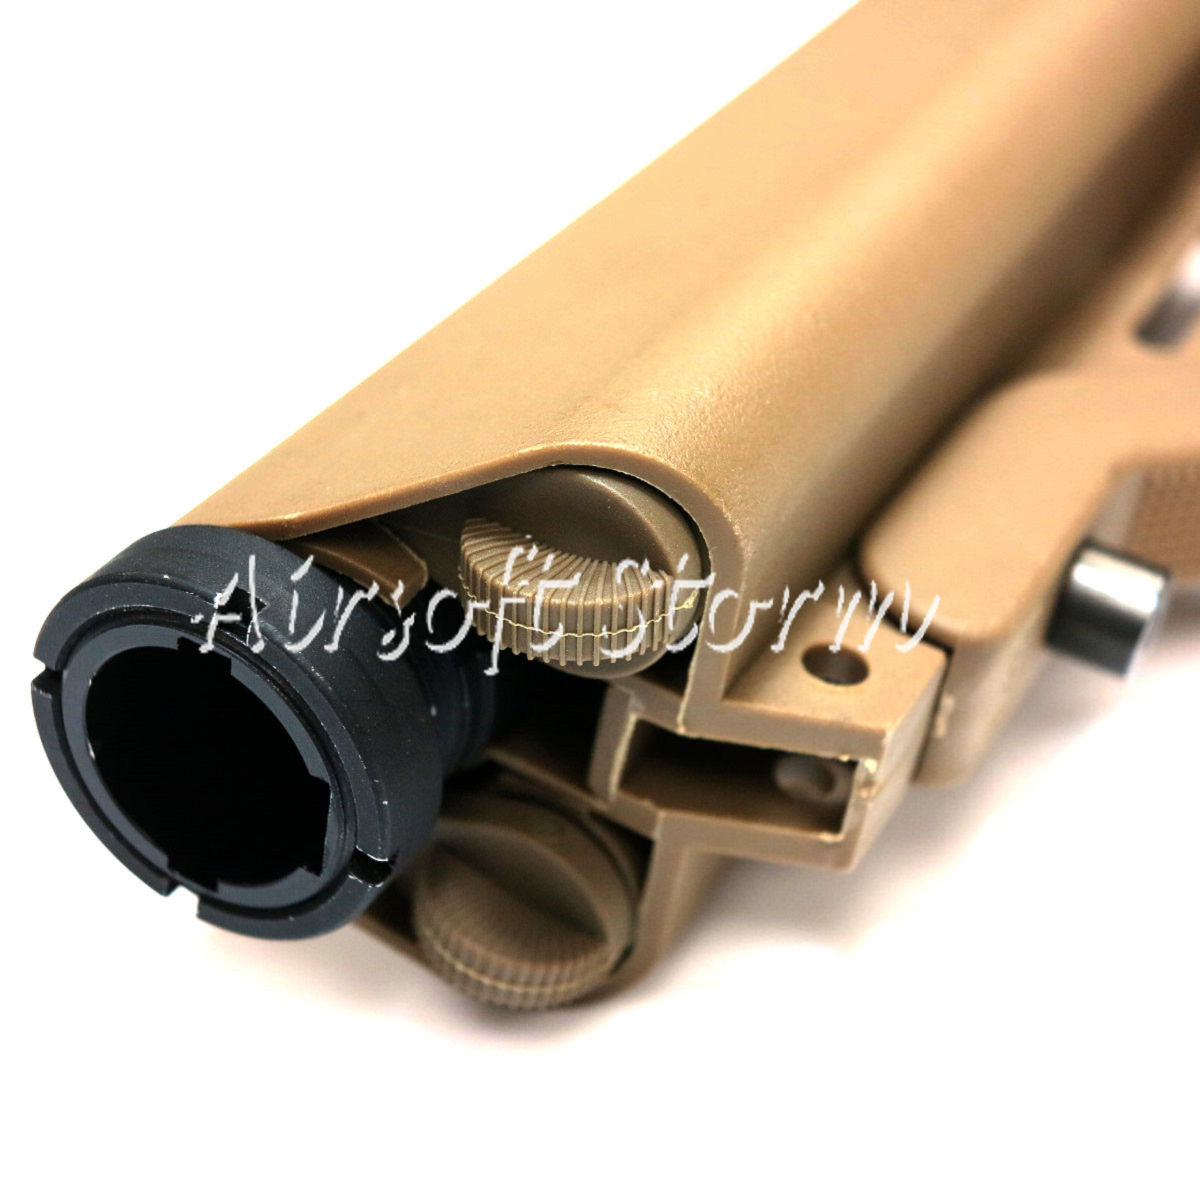 Airsoft Tactical Gear Army Force Special Force Crane Stock for M4 / M16 Tan